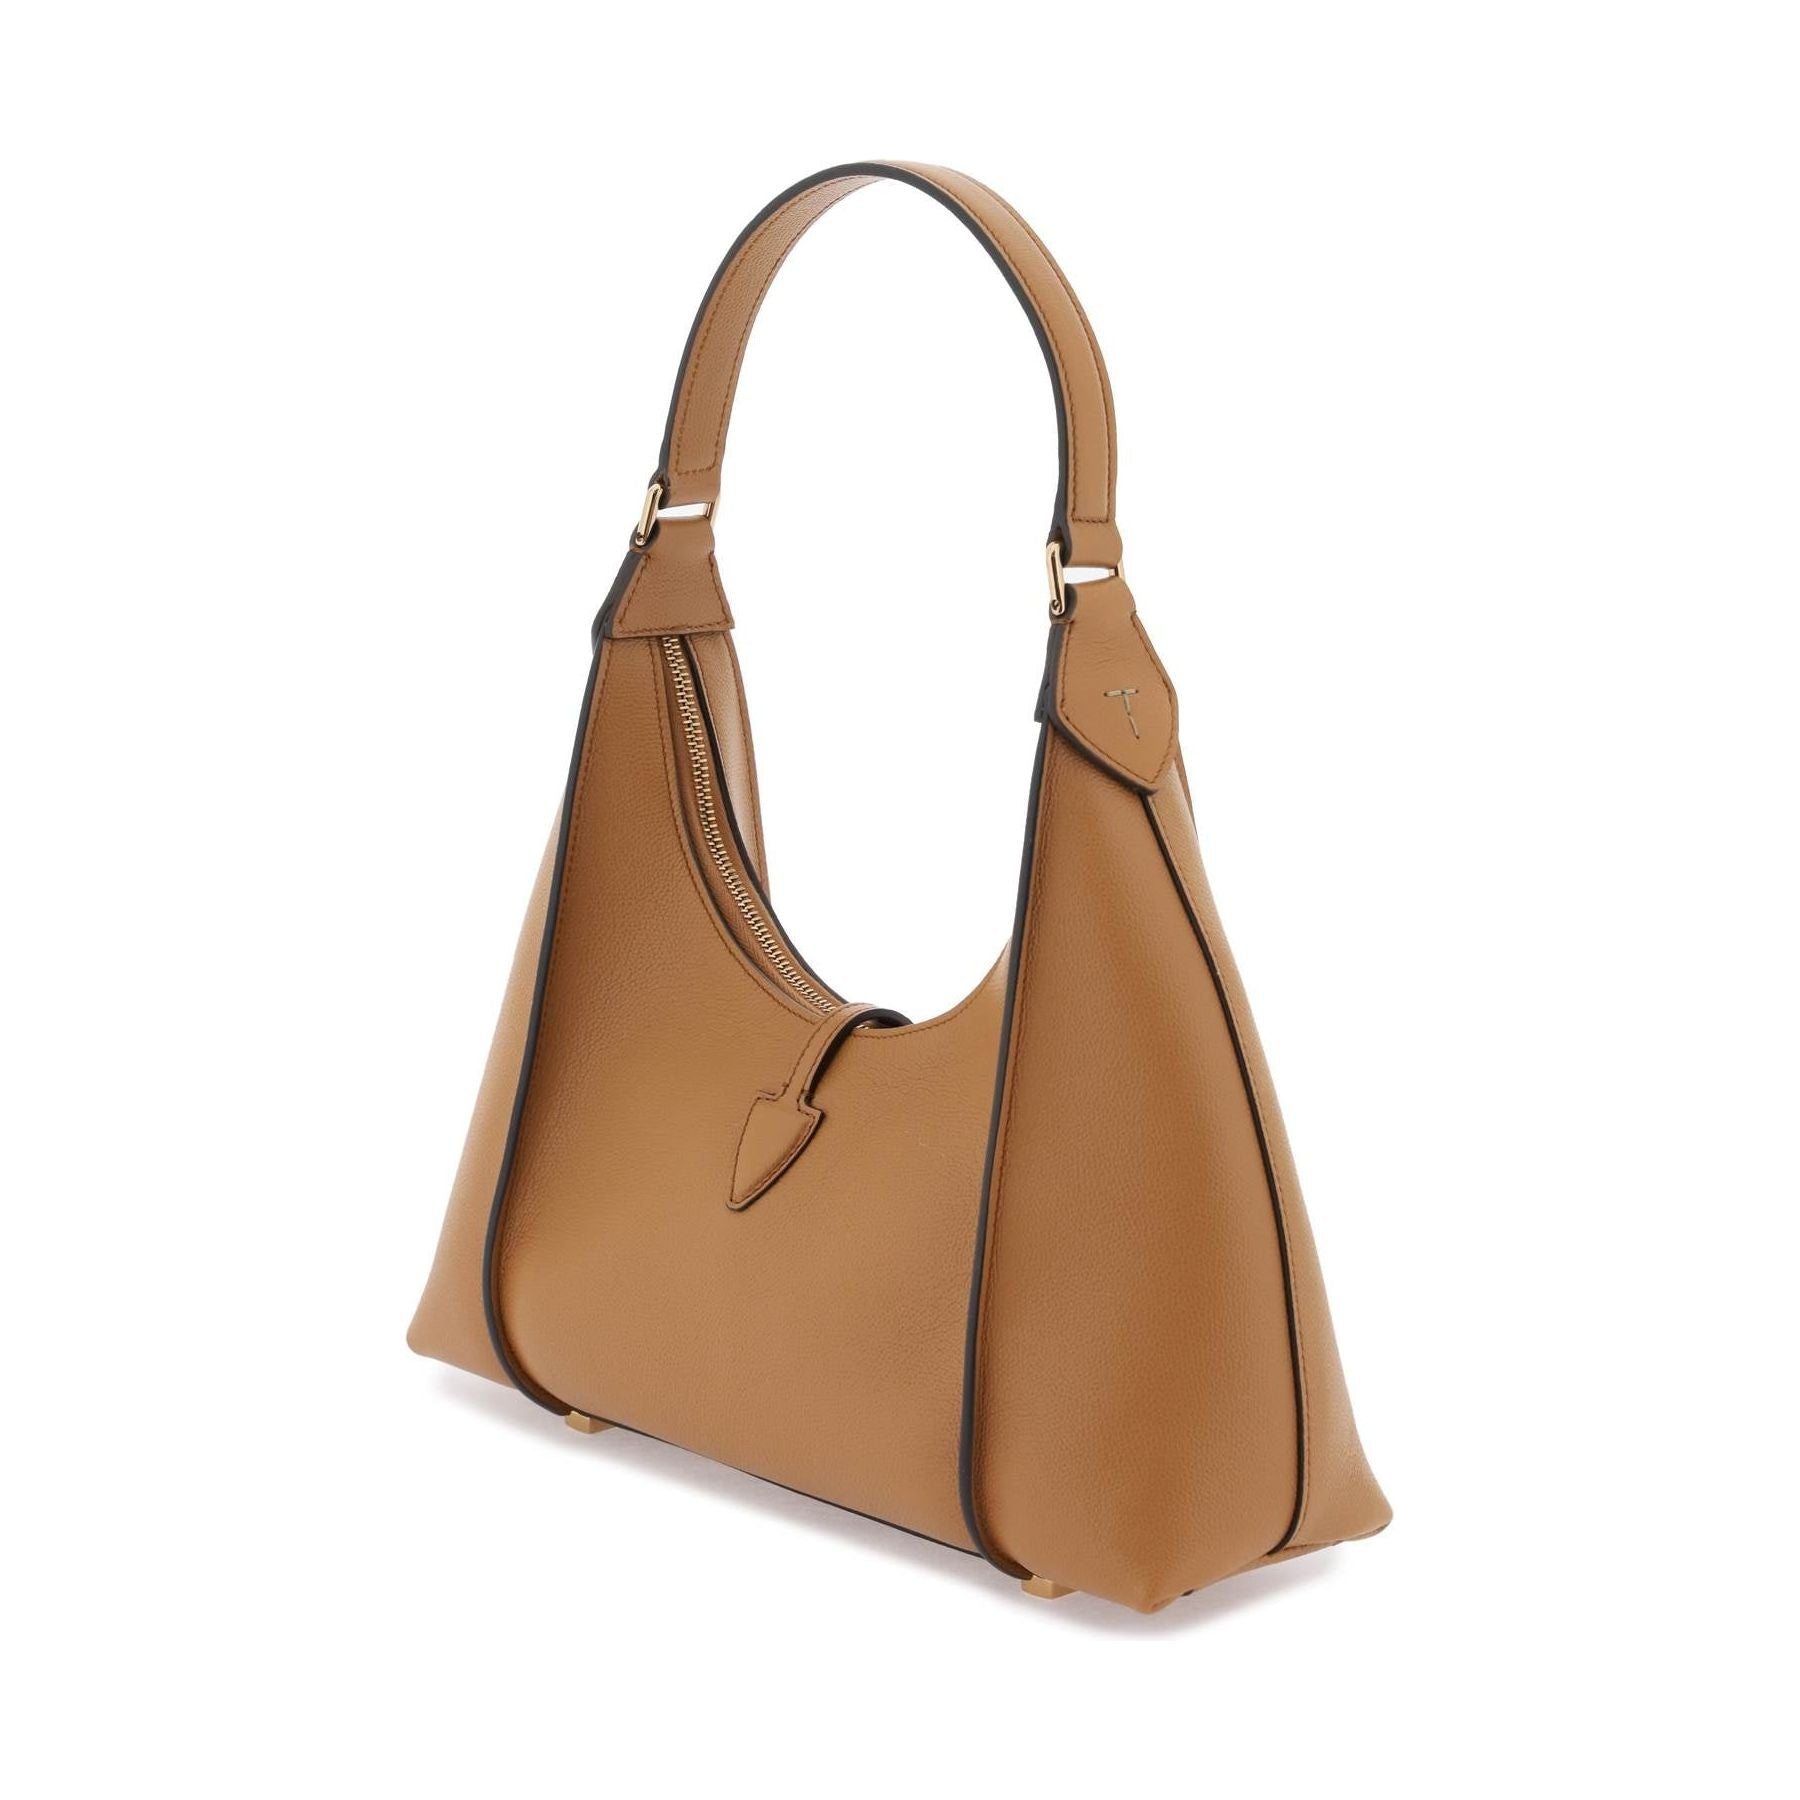 T Timeless Small Leather Shoulder Bag